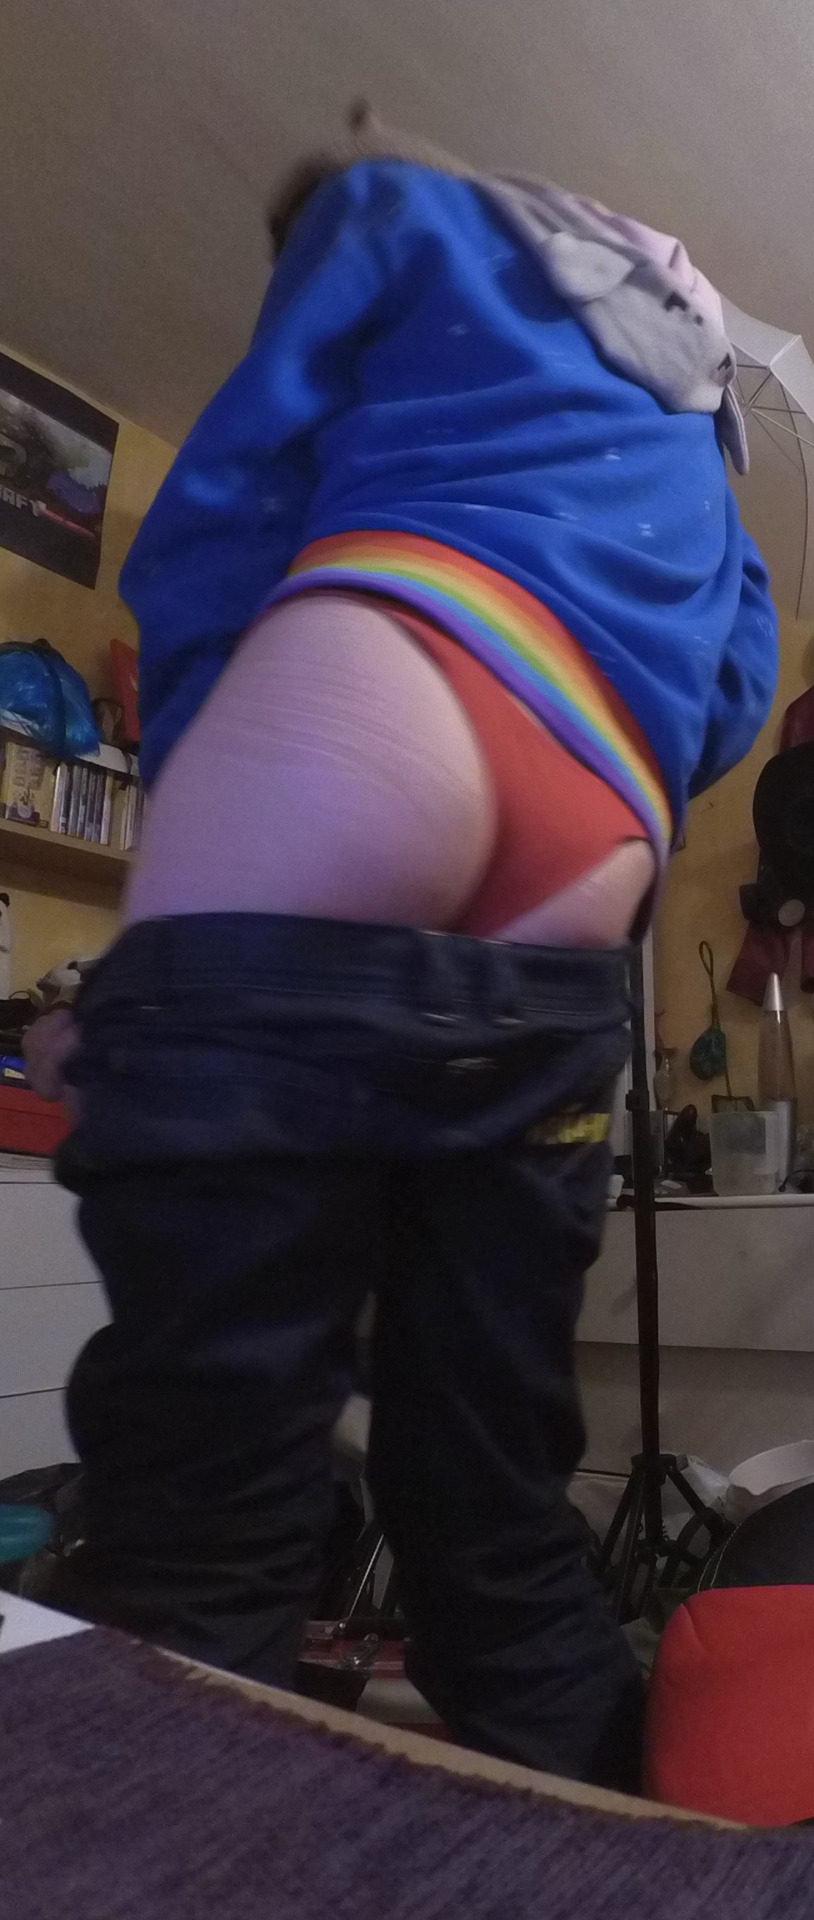 More pictures for the boyfriend. Excuse the lines on my butt - I was sitting on a